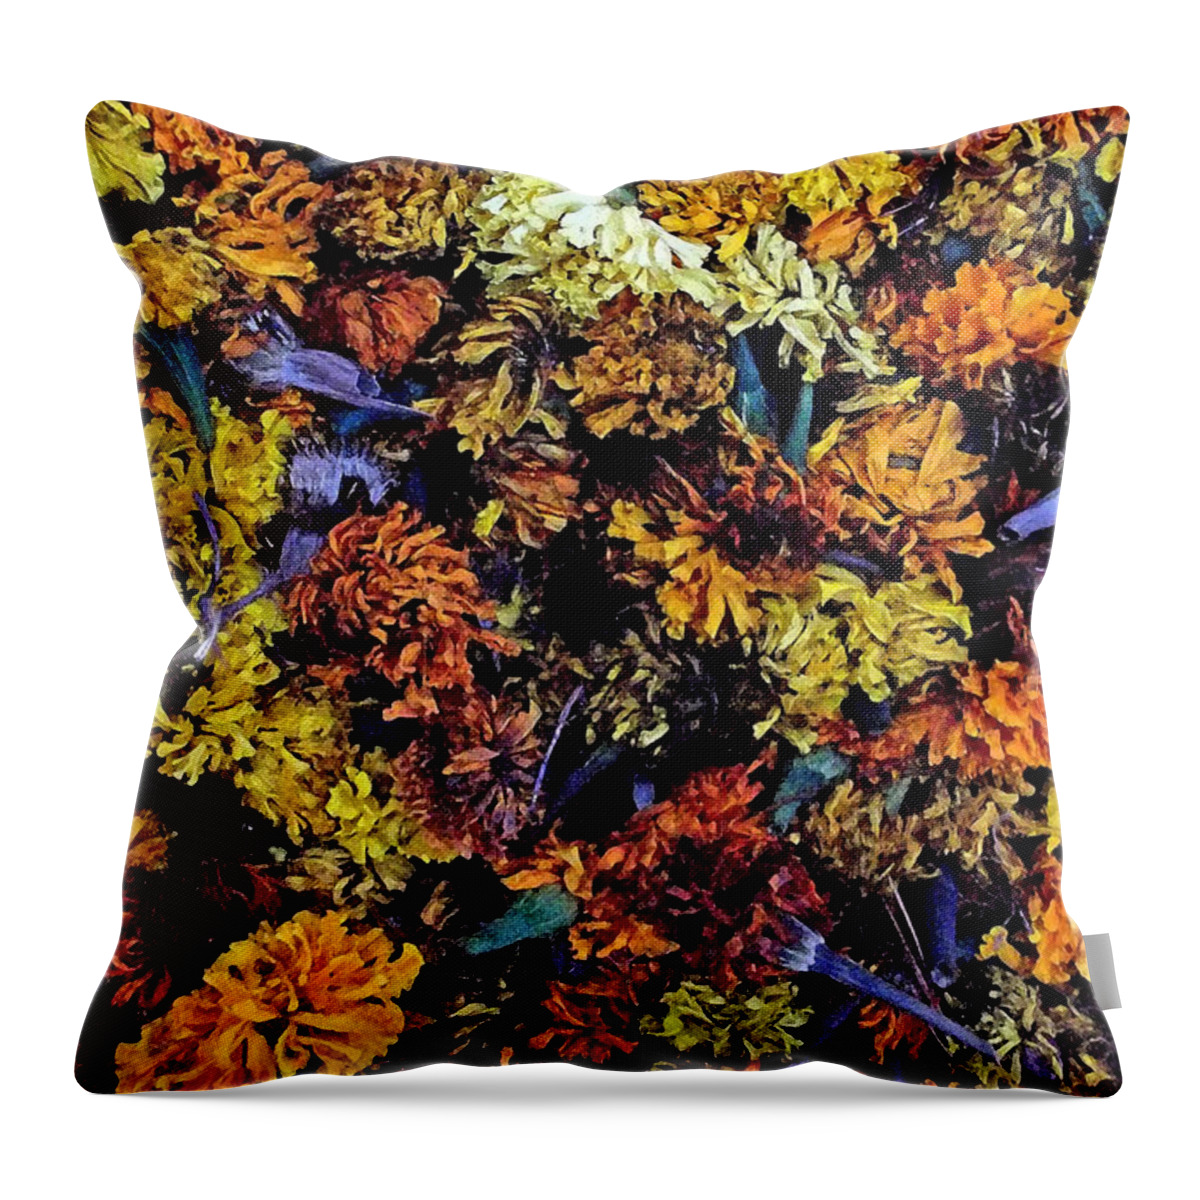 Flowers Throw Pillow featuring the photograph Future Marigolds by Harold Zimmer